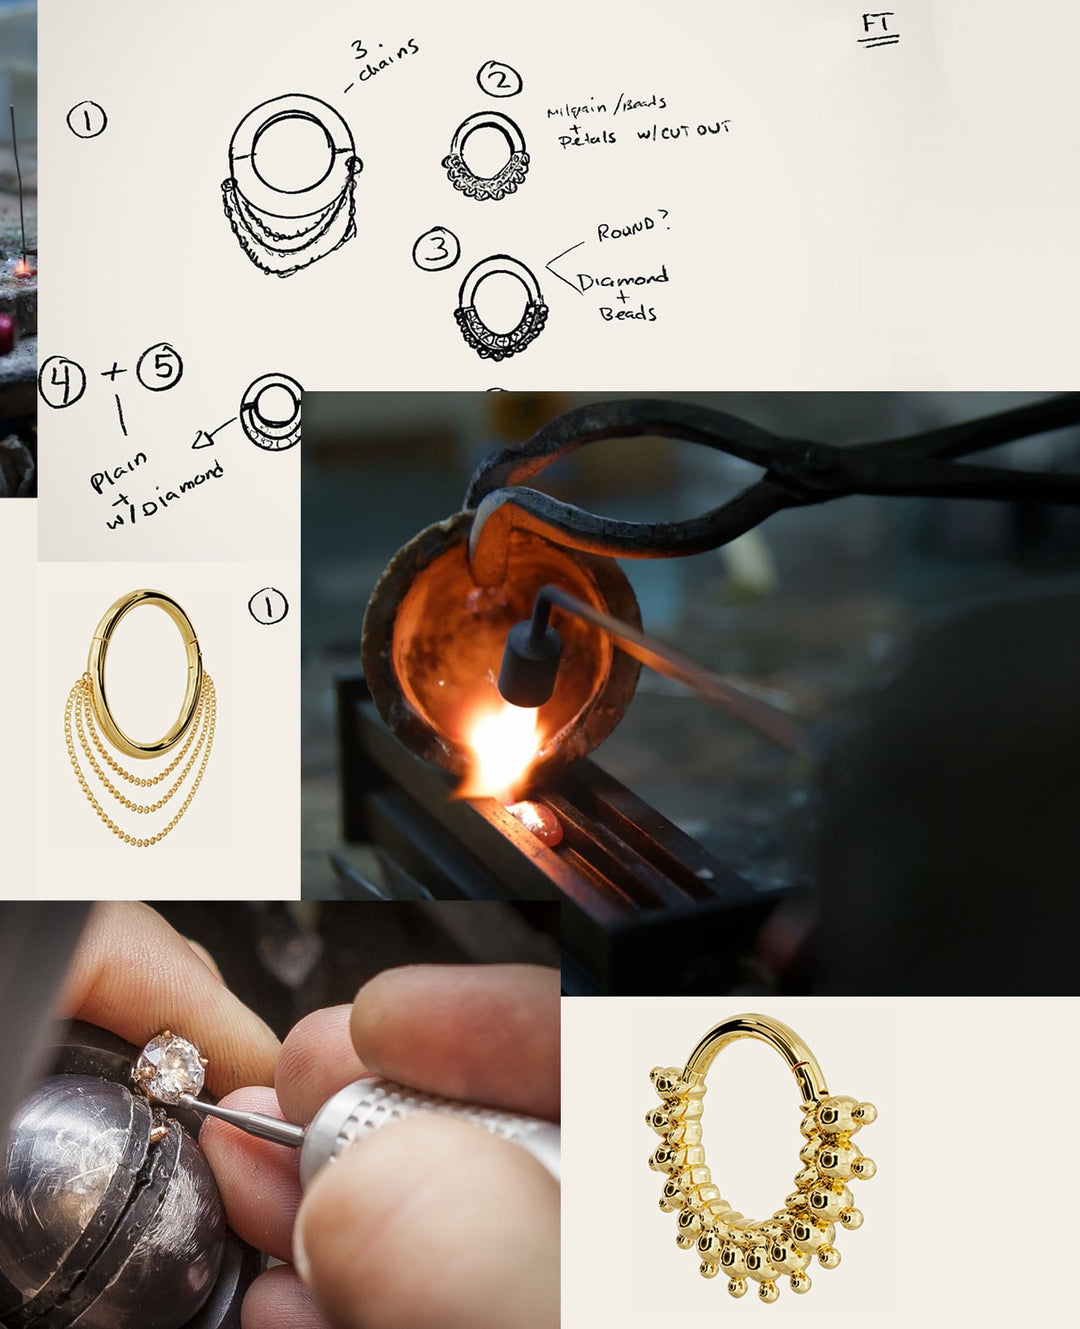 Jewelry production collage